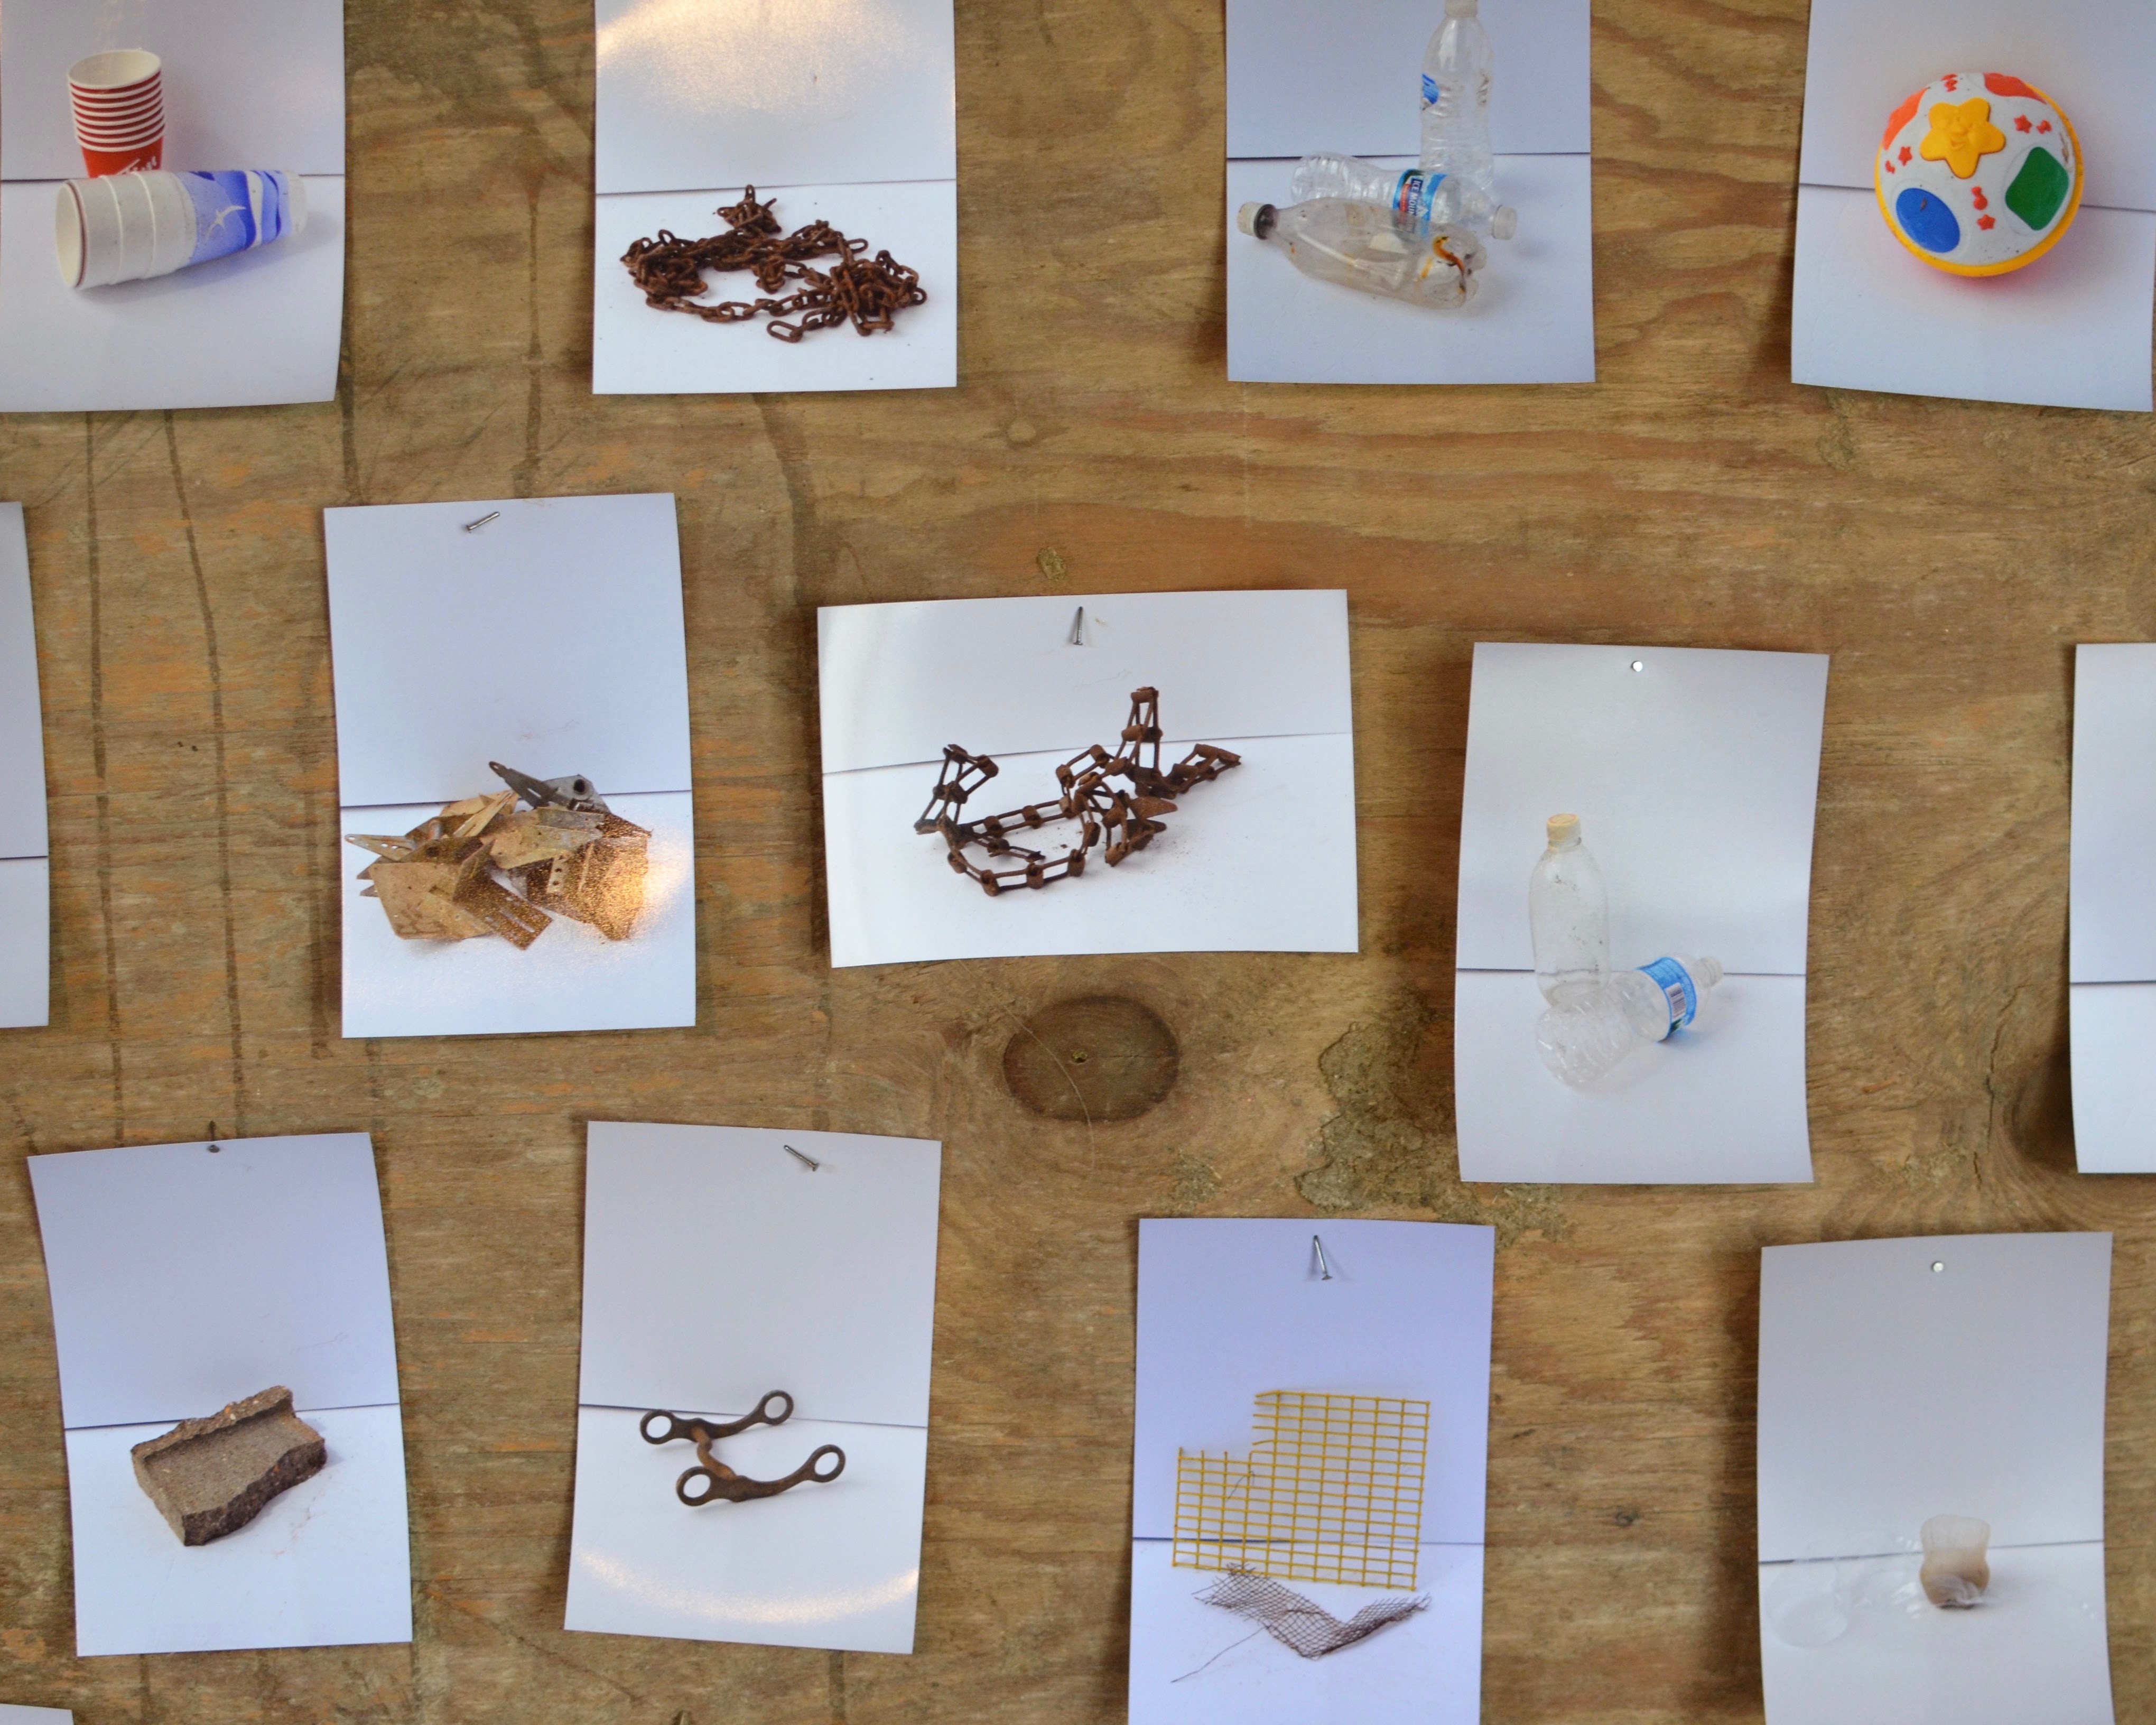 SOIL SERIES: A Social Drawing (Francesca Fiore and Hillary Wagner)